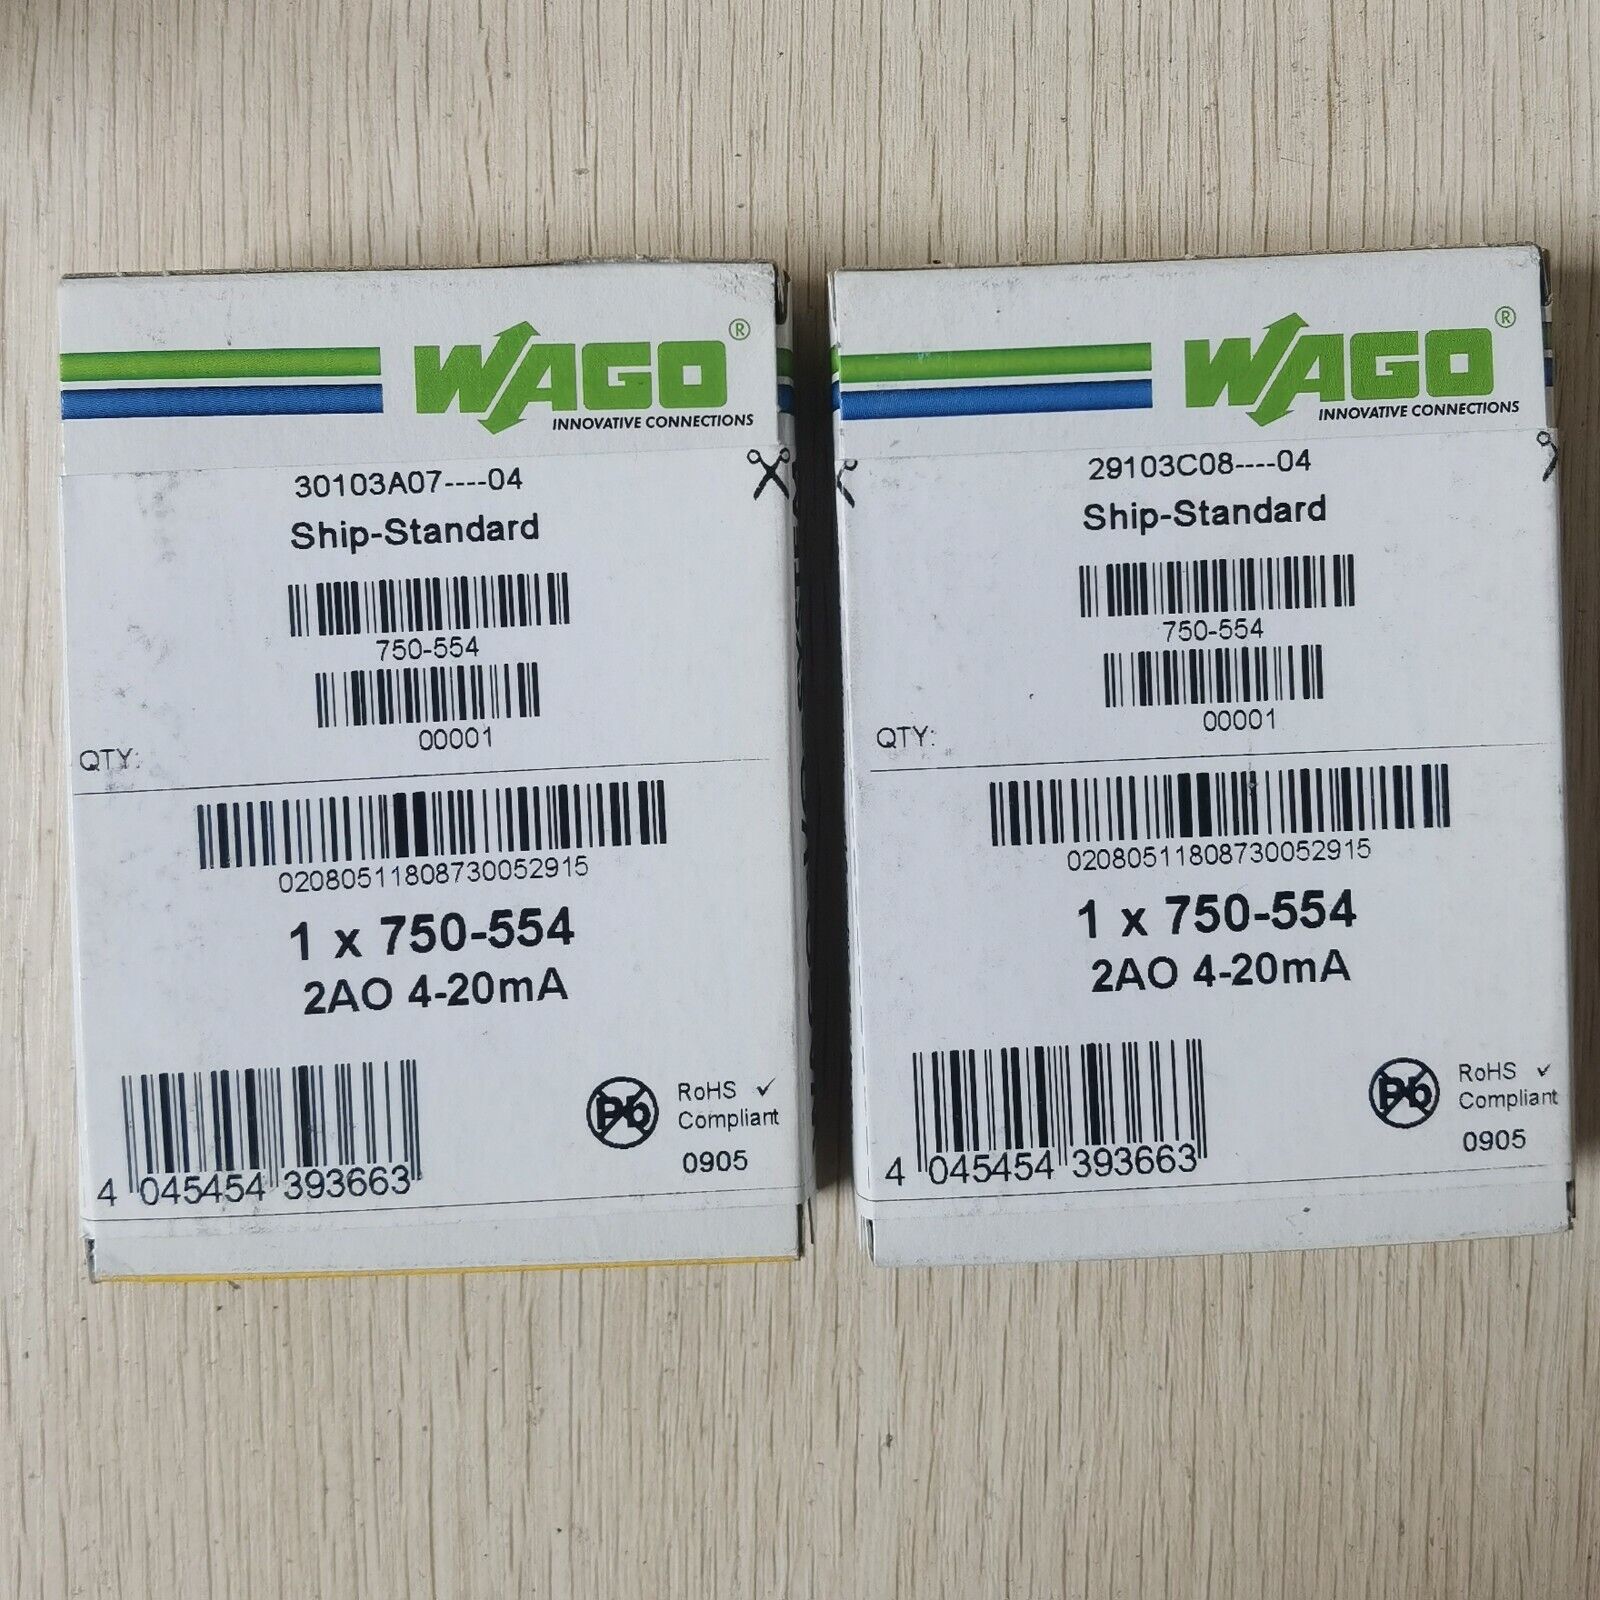 One New WAGO 750-554 750554 PLC In Box Expedited Shipping